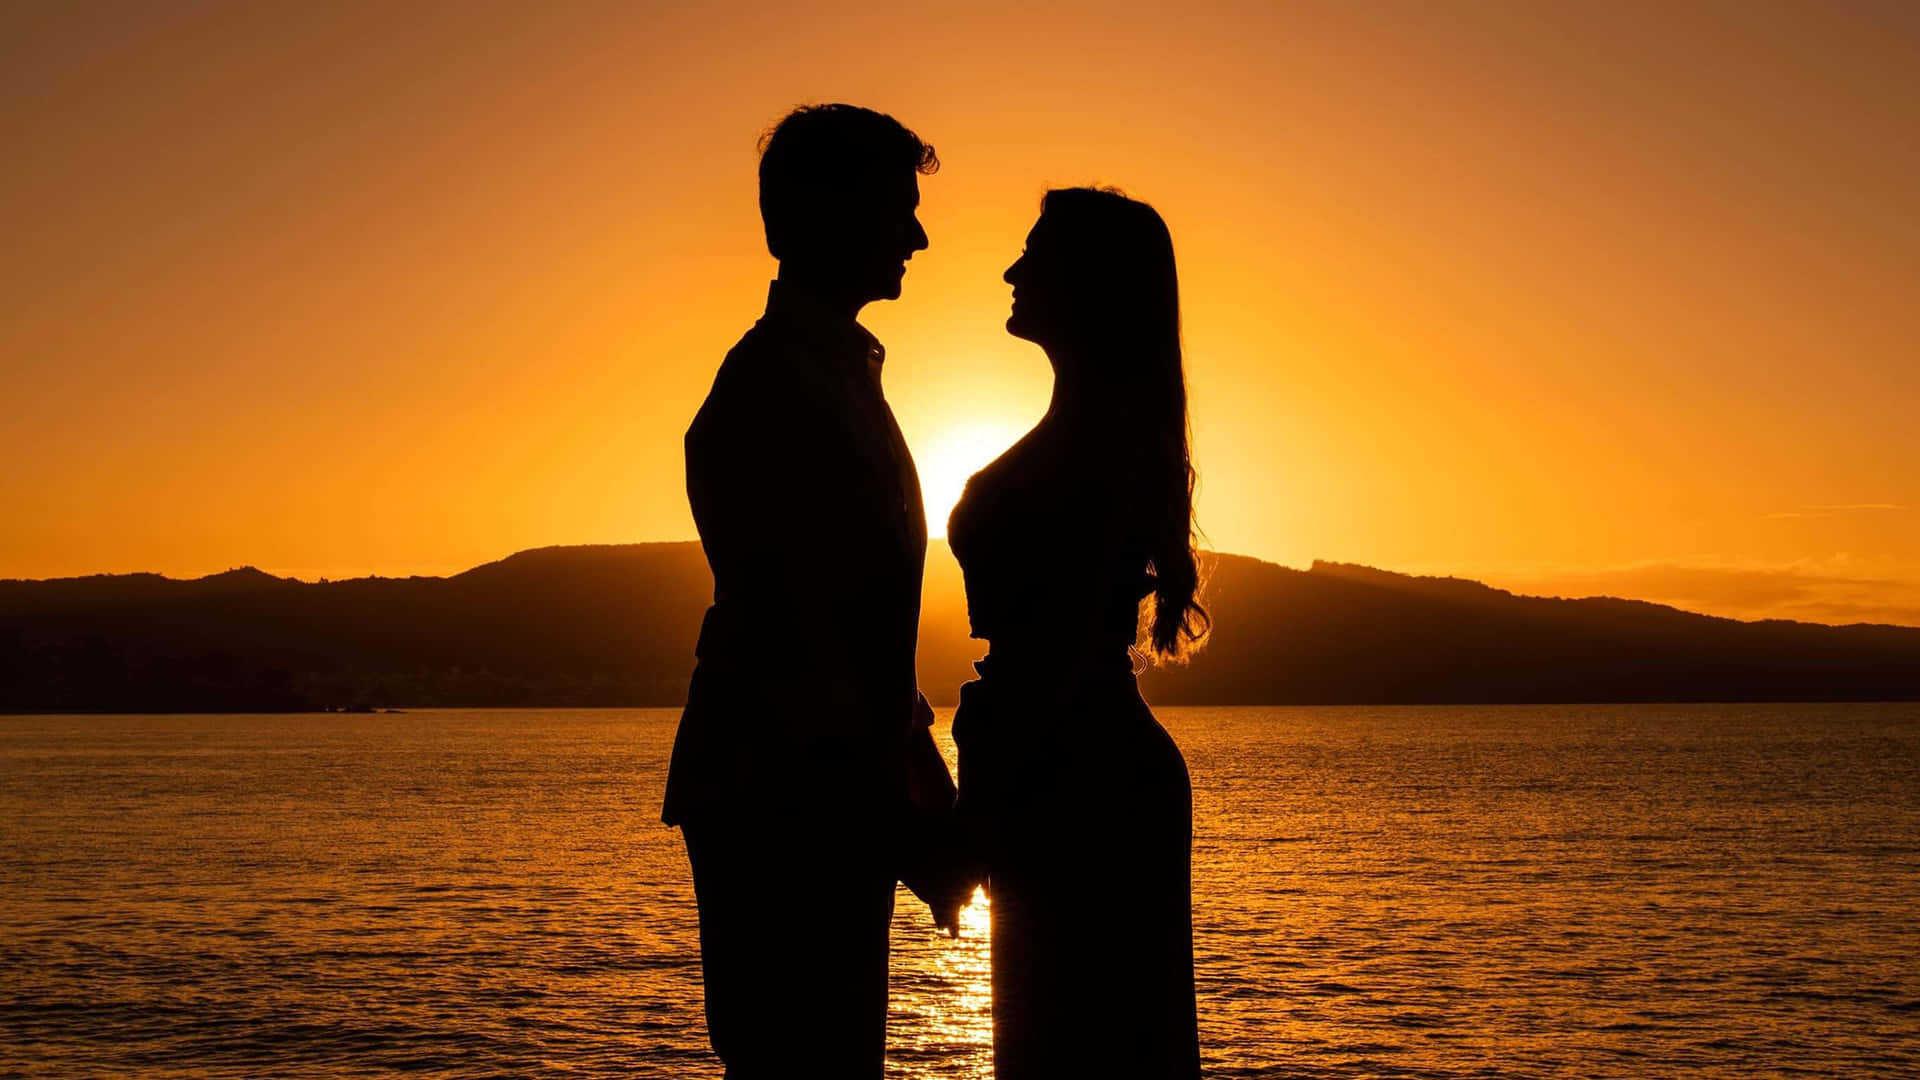 Sunset Couple Picture Silhouette  Looking